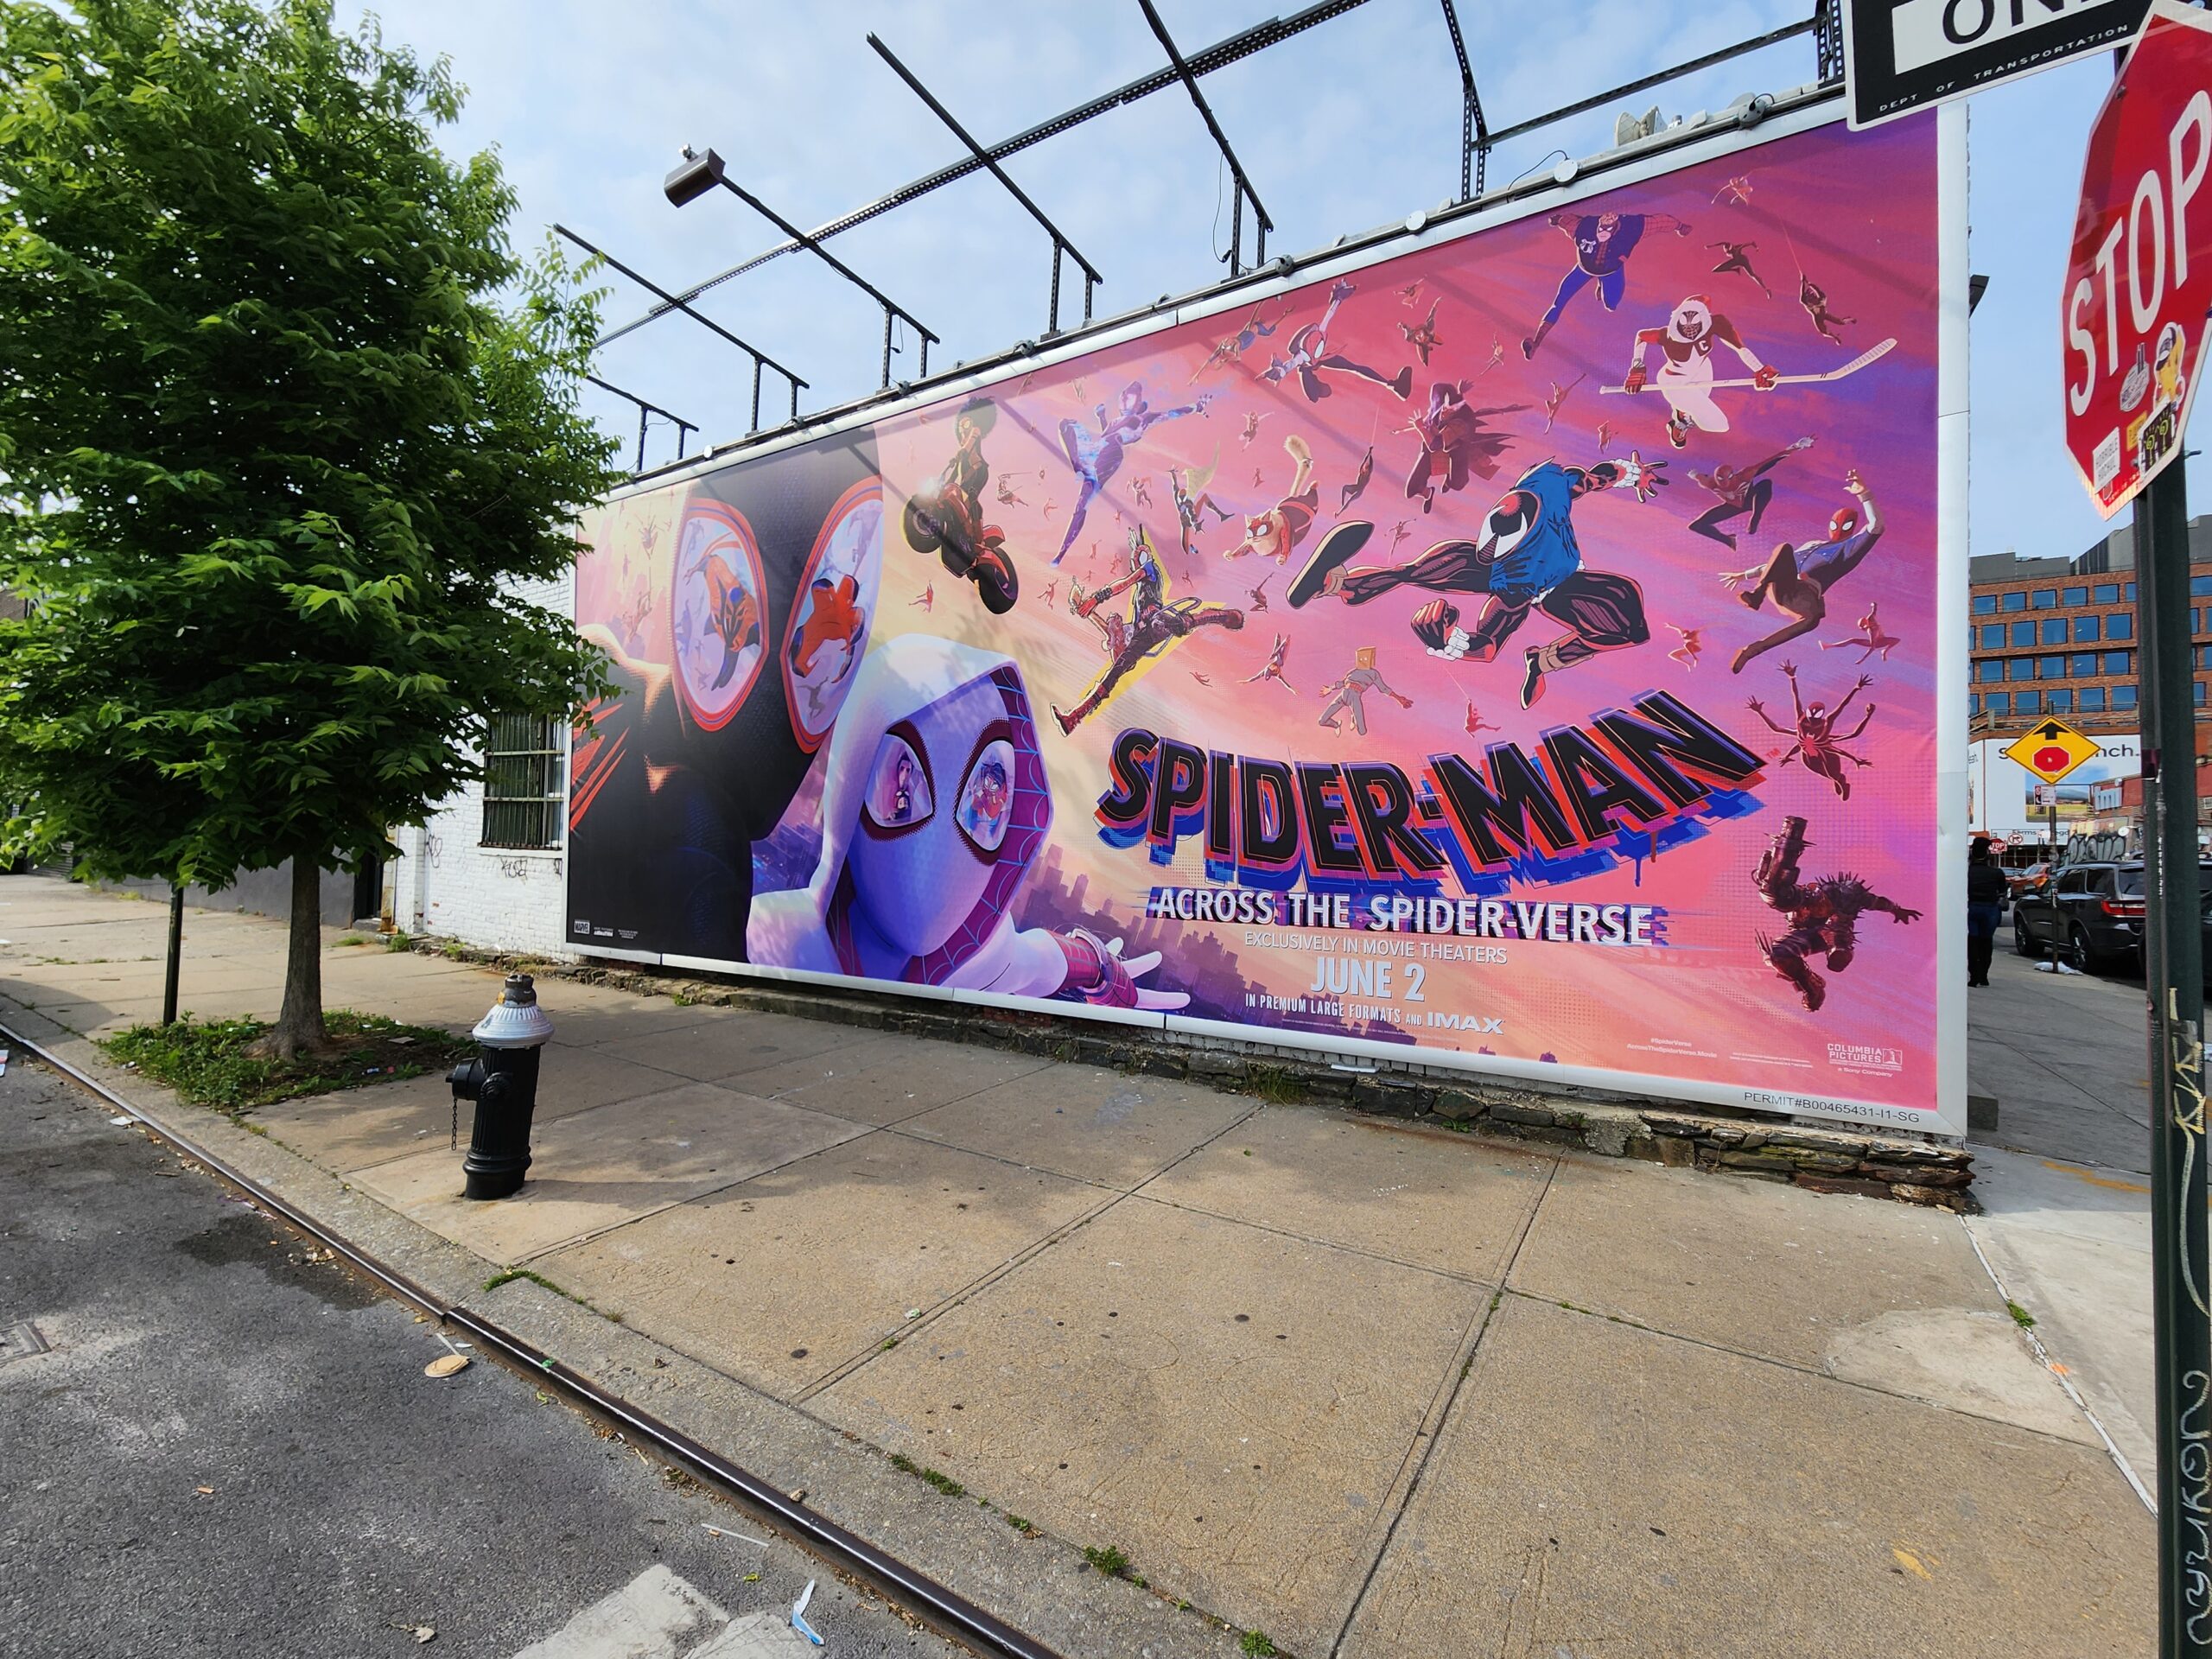 Spider-Man Across the Spiderverse Wallscapes Brooklyn Wythe Ave & 15th St